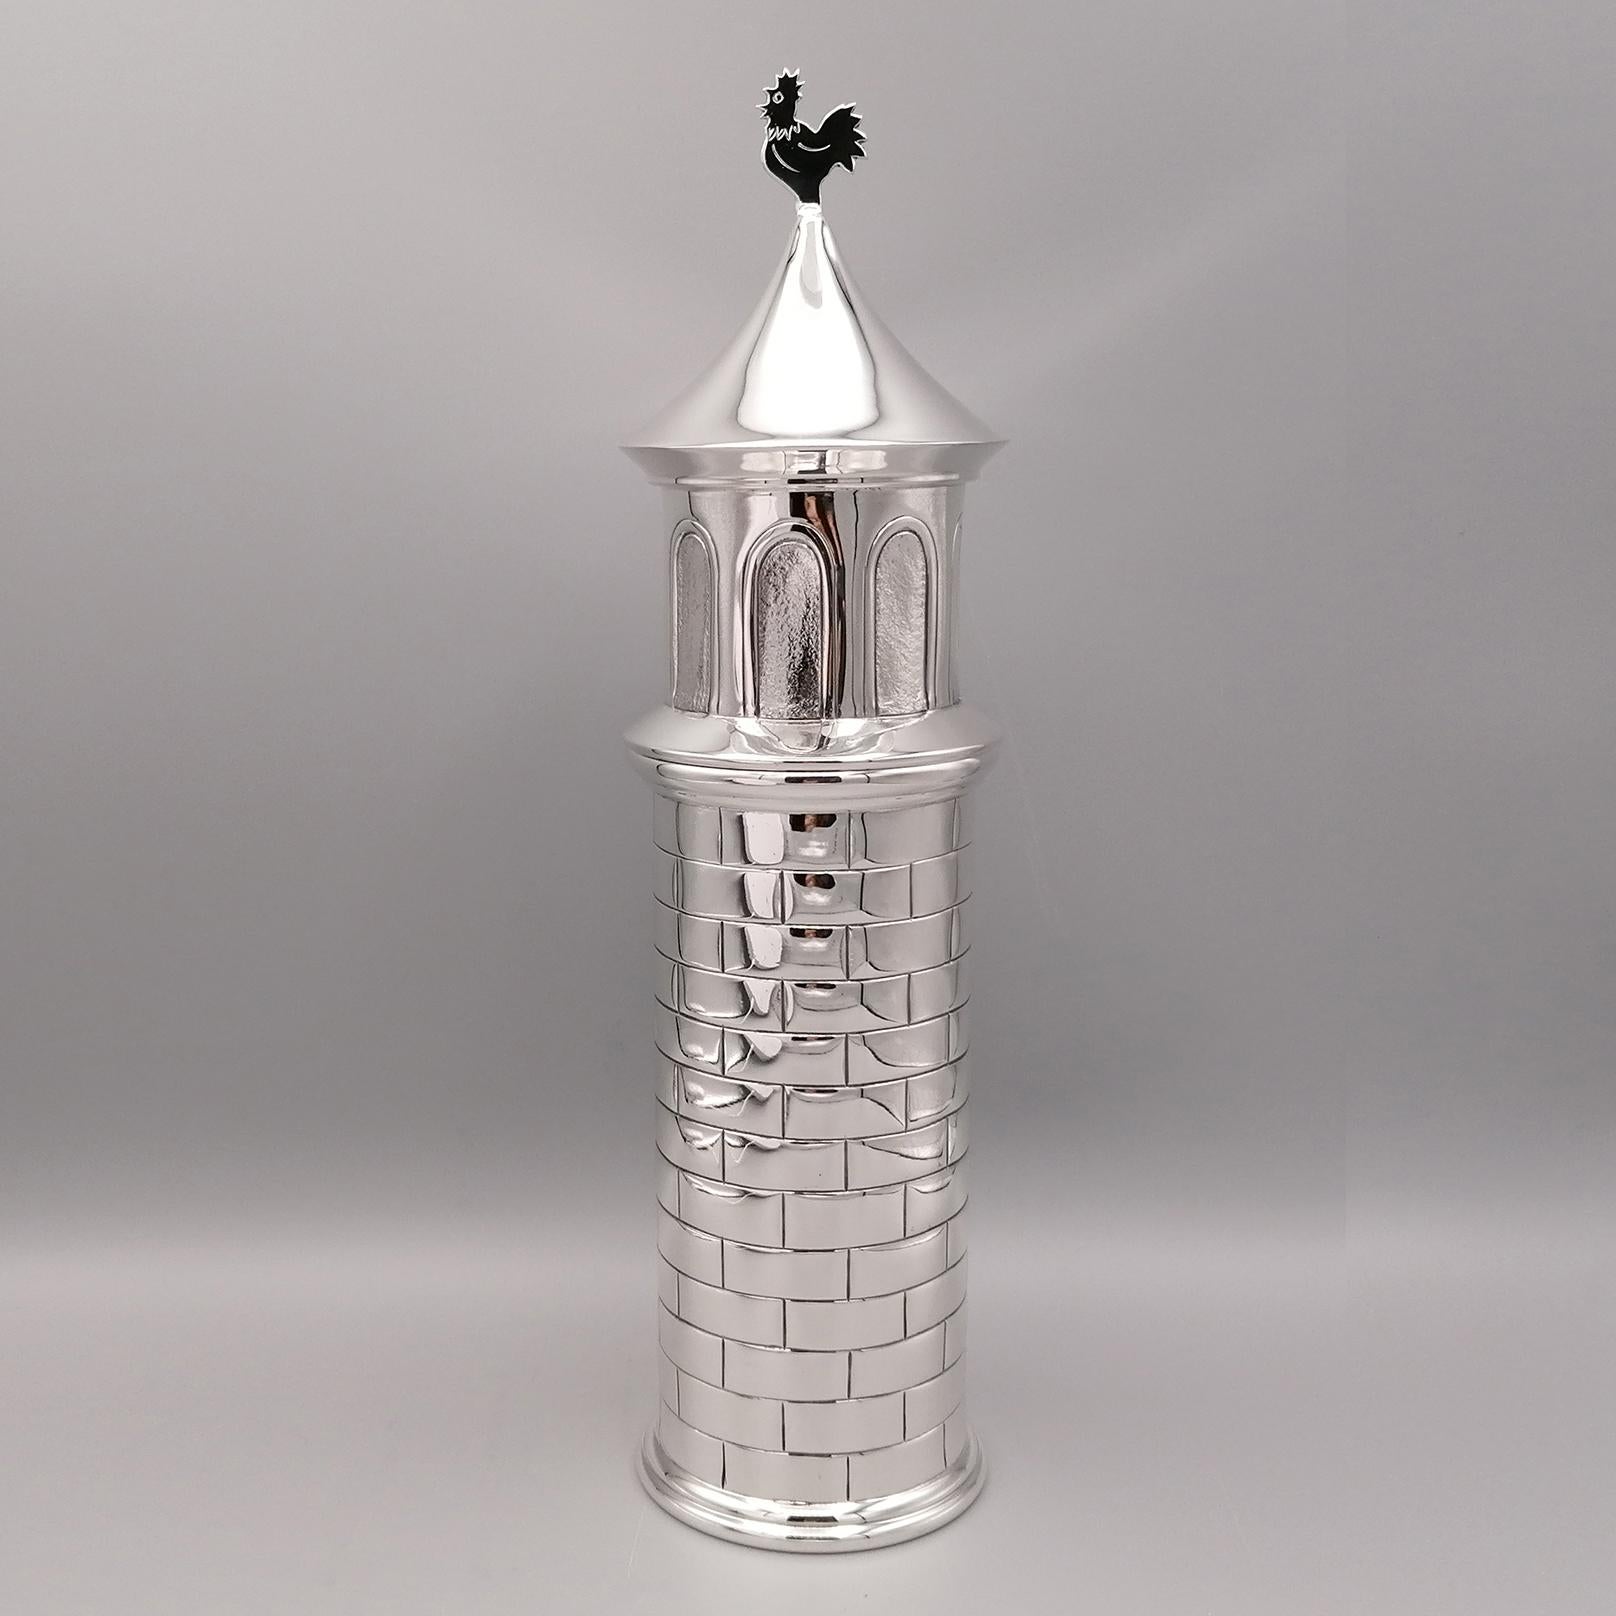 Tower shaped box in solid sterling silver round shape.
Made entirely by hand, with a chisel reproducing the bricks on the body and the windows are embossed and chiseled in the lantern. The tower is smooth, surmounted by a rooster.
Ideal for